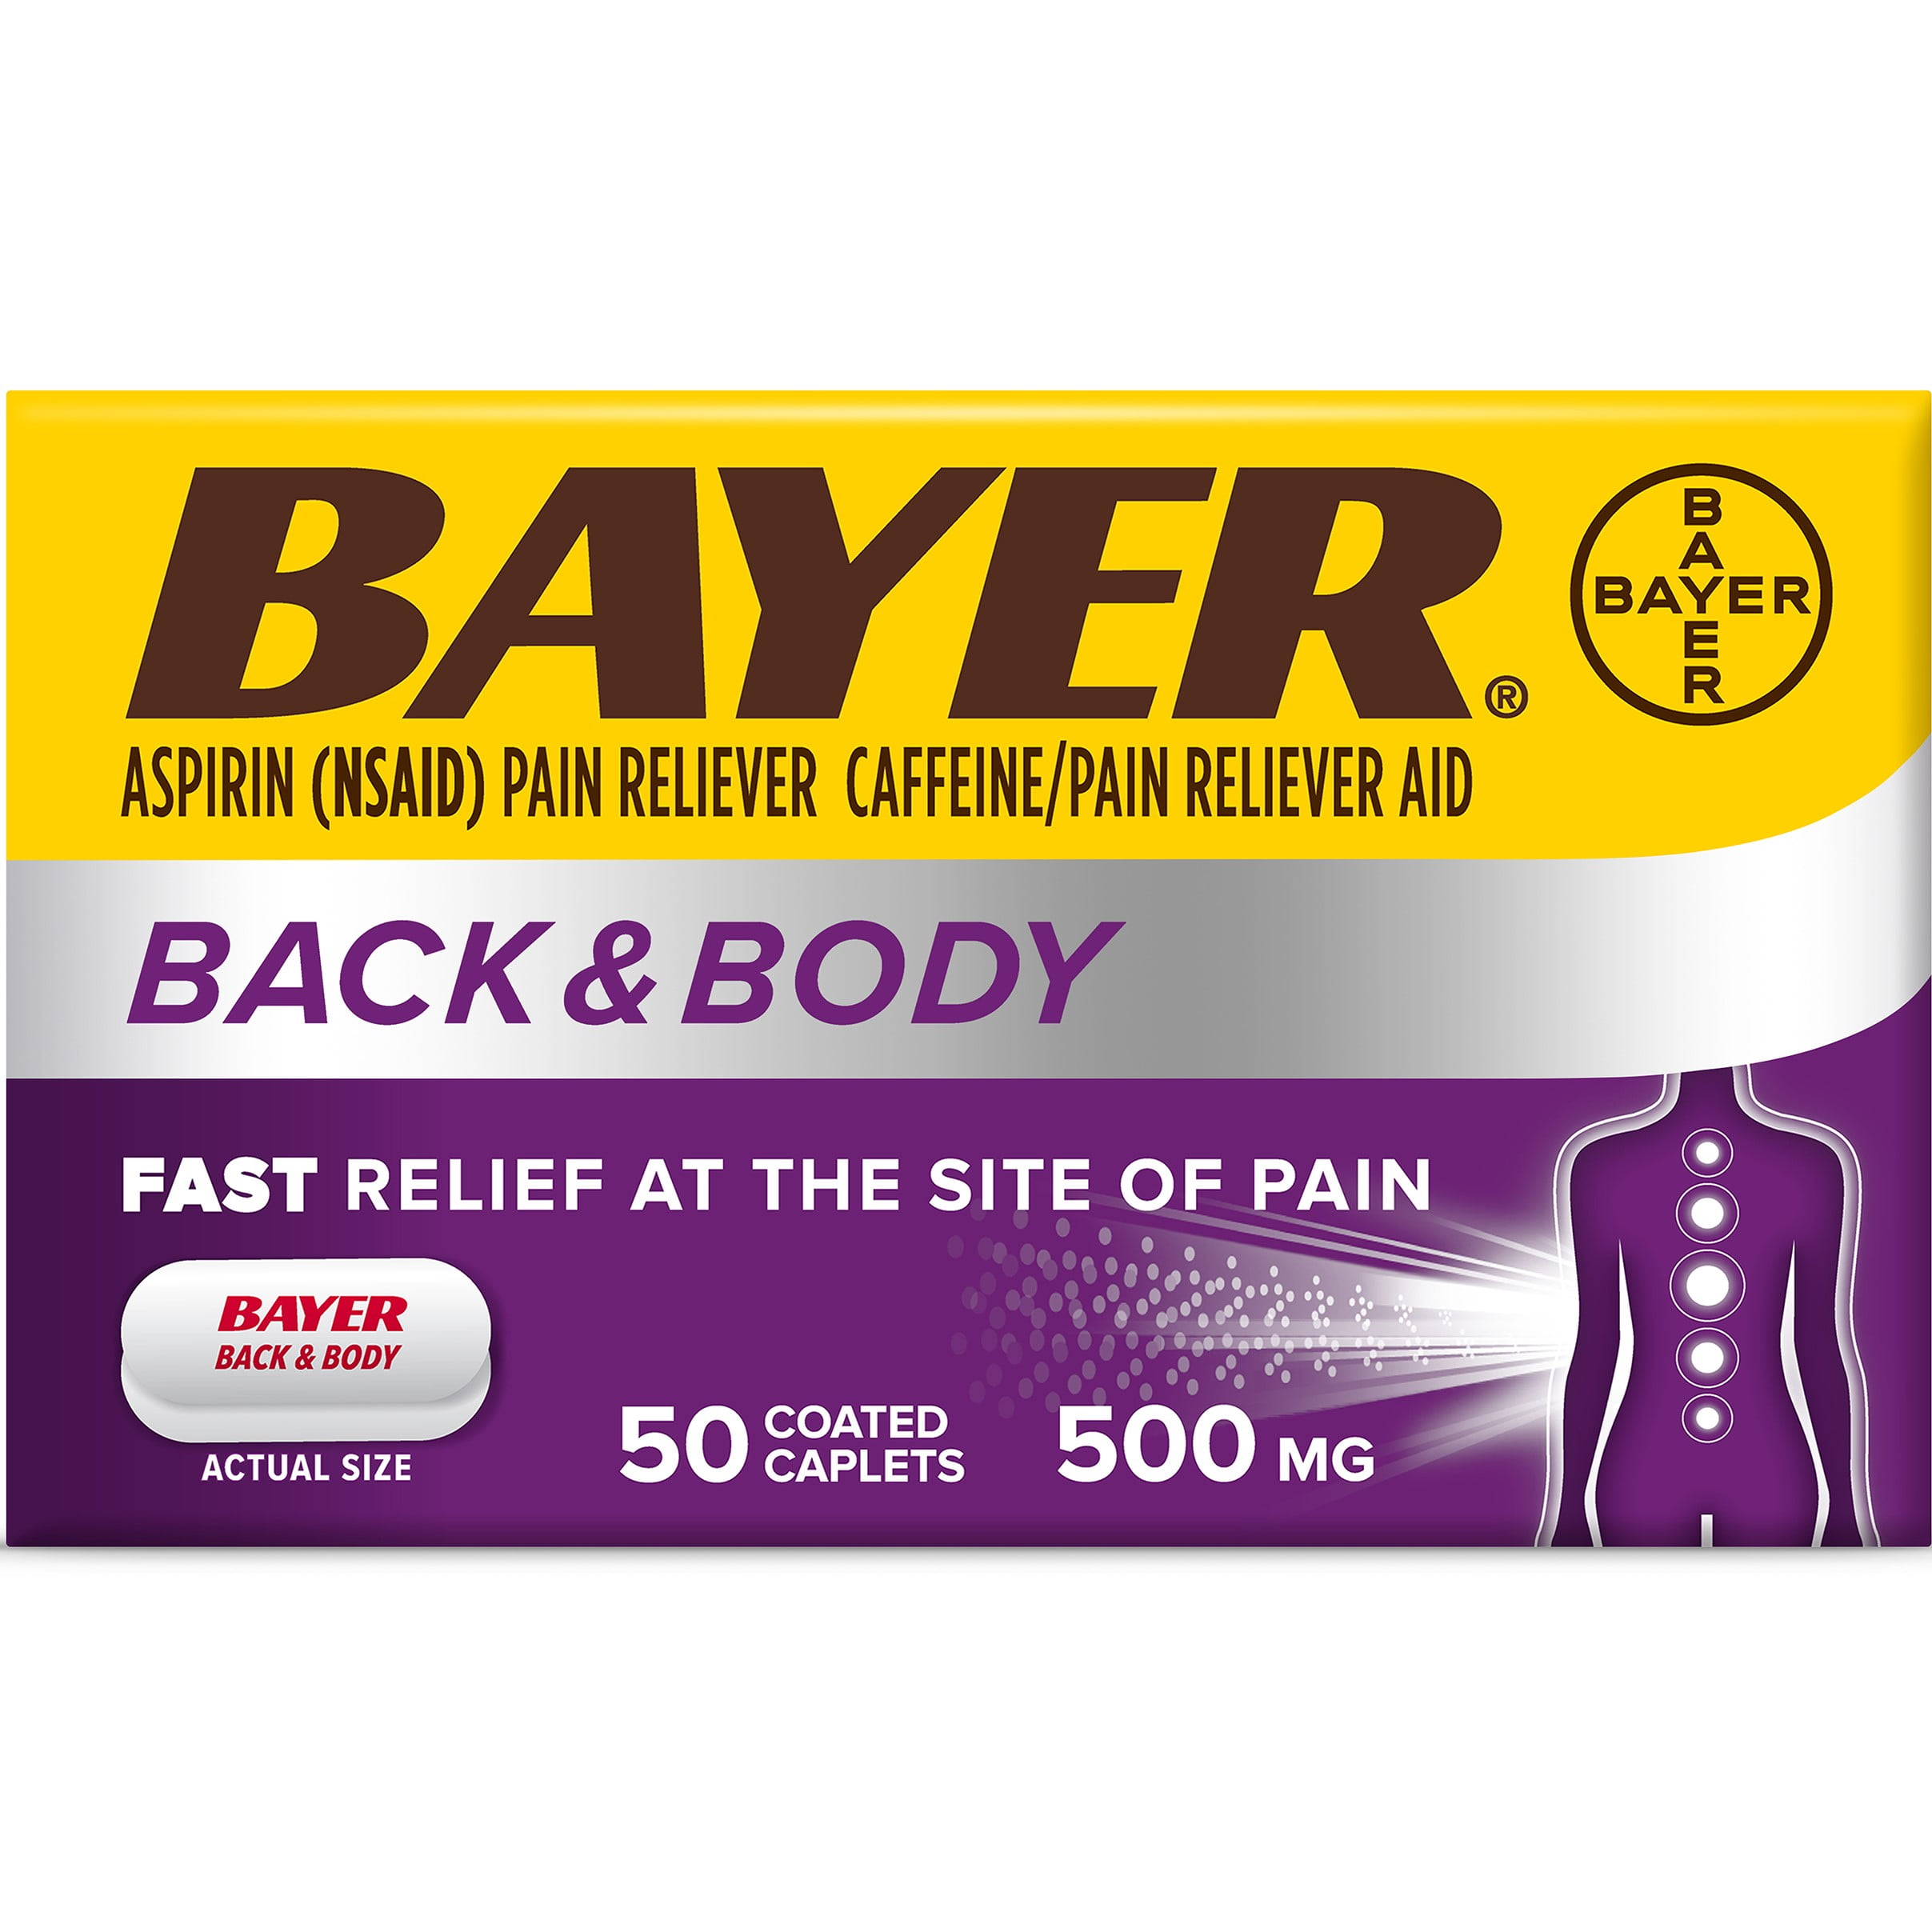 That Tiny Pocket on Your Jeans Is Perfect for Aspirin, Says Bayer